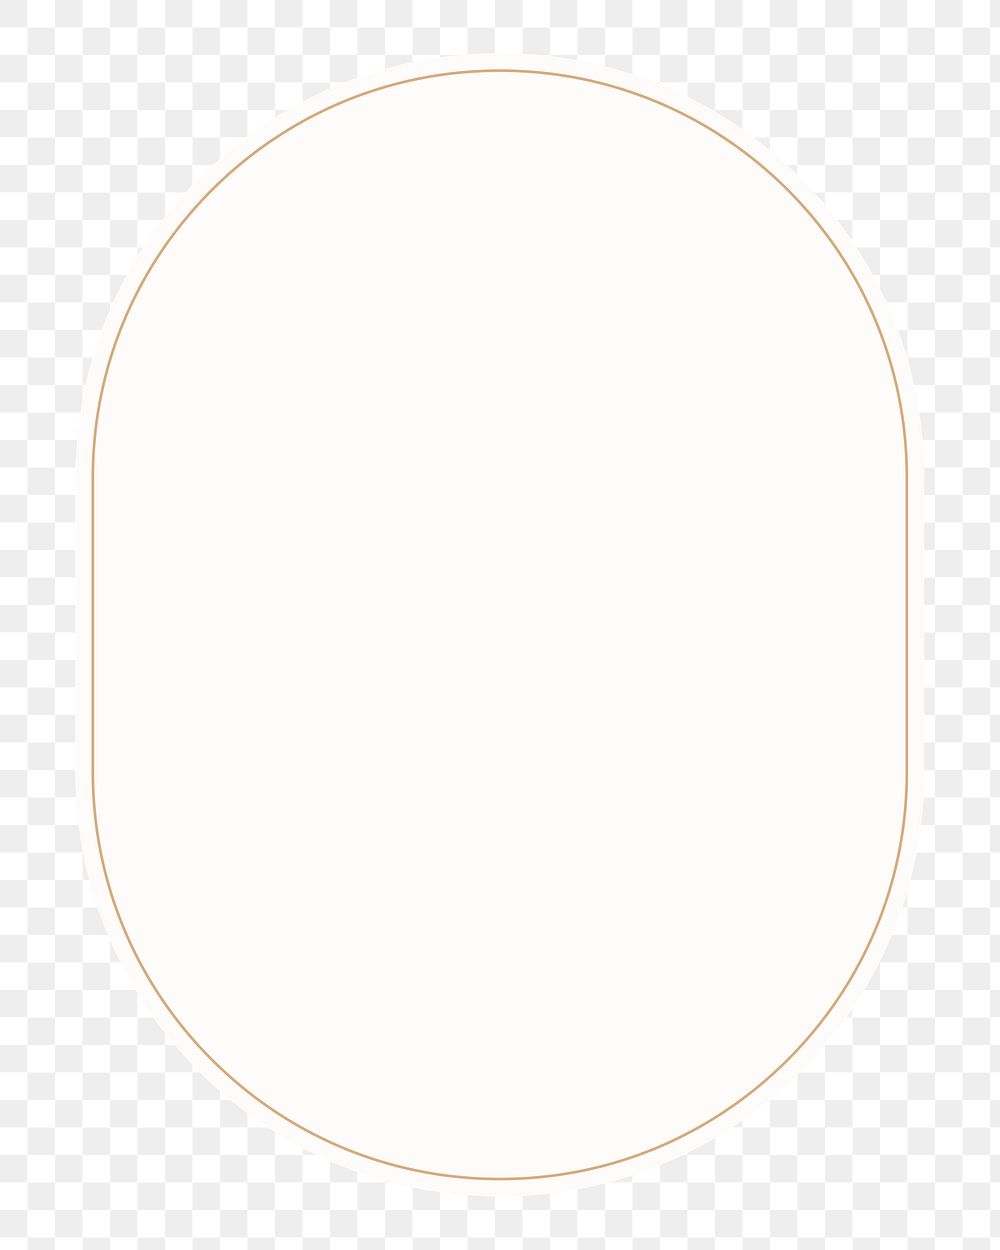 Aesthetic oval png frame sticker, transparent background